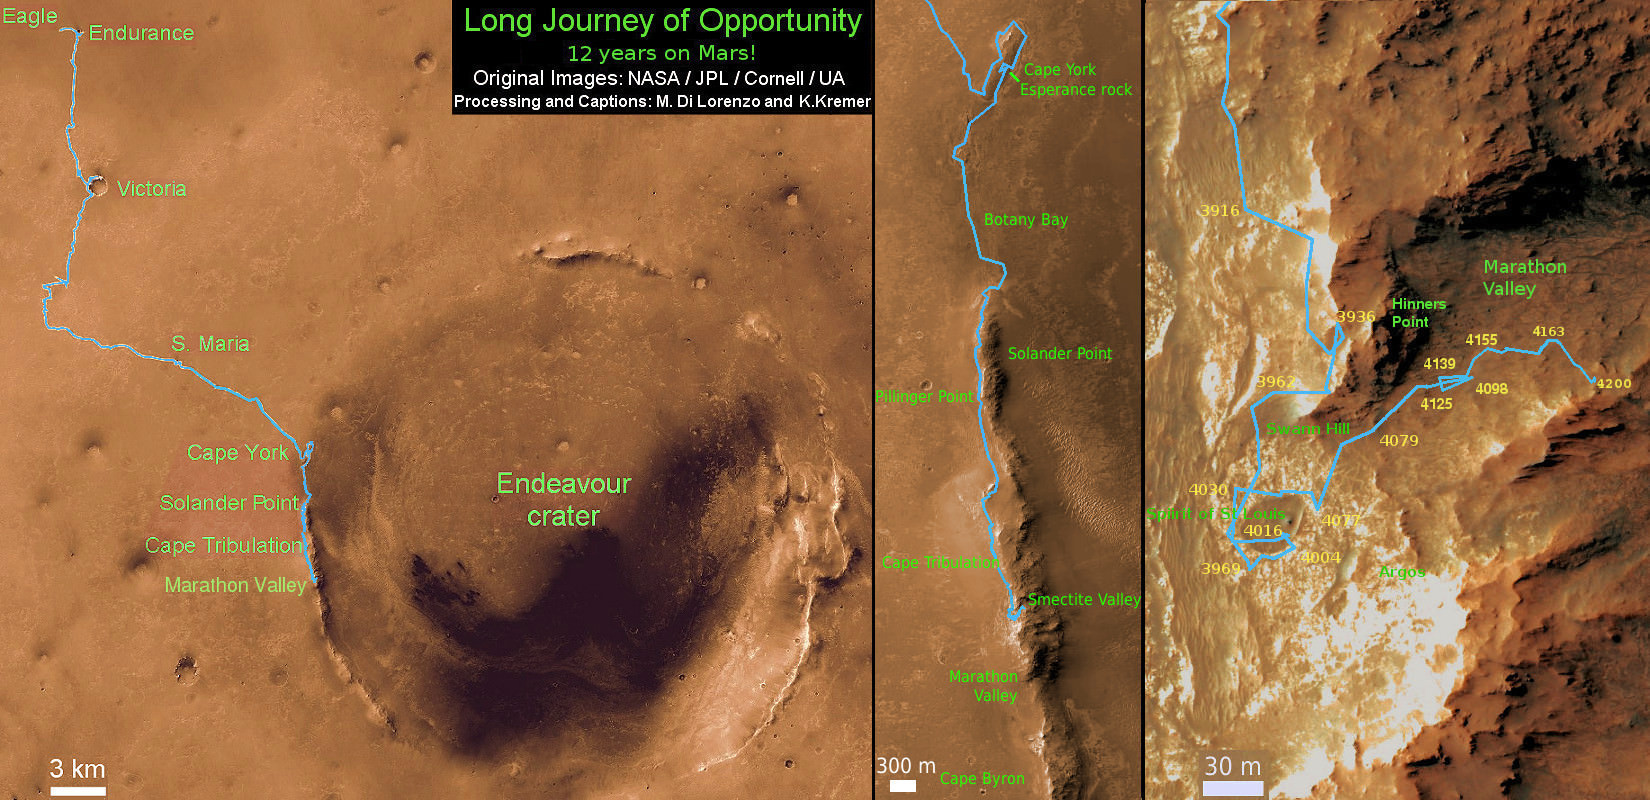 12 Year Traverse Map for NASA’s Opportunity rover from 2004 to 2016. This map shows the entire path the rover has driven during almost 12 years and more than a marathon runners distance on Mars for over 4267 Sols, or Martian days, since landing inside Eagle Crater on Jan 24, 2004 - to current location at the western rim of Endeavour Crater and descending into Marathon Valley. Rover surpassed Marathon distance on Sol 3968 and marked 11th Martian anniversary on Sol 3911. Opportunity discovered clay minerals at Esperance – indicative of a habitable zone - and is currently searching for more at Marathon Valley.  Credit: NASA/JPL/Cornell/ASU/Marco Di Lorenzo/Ken Kremer/kenkremer.com